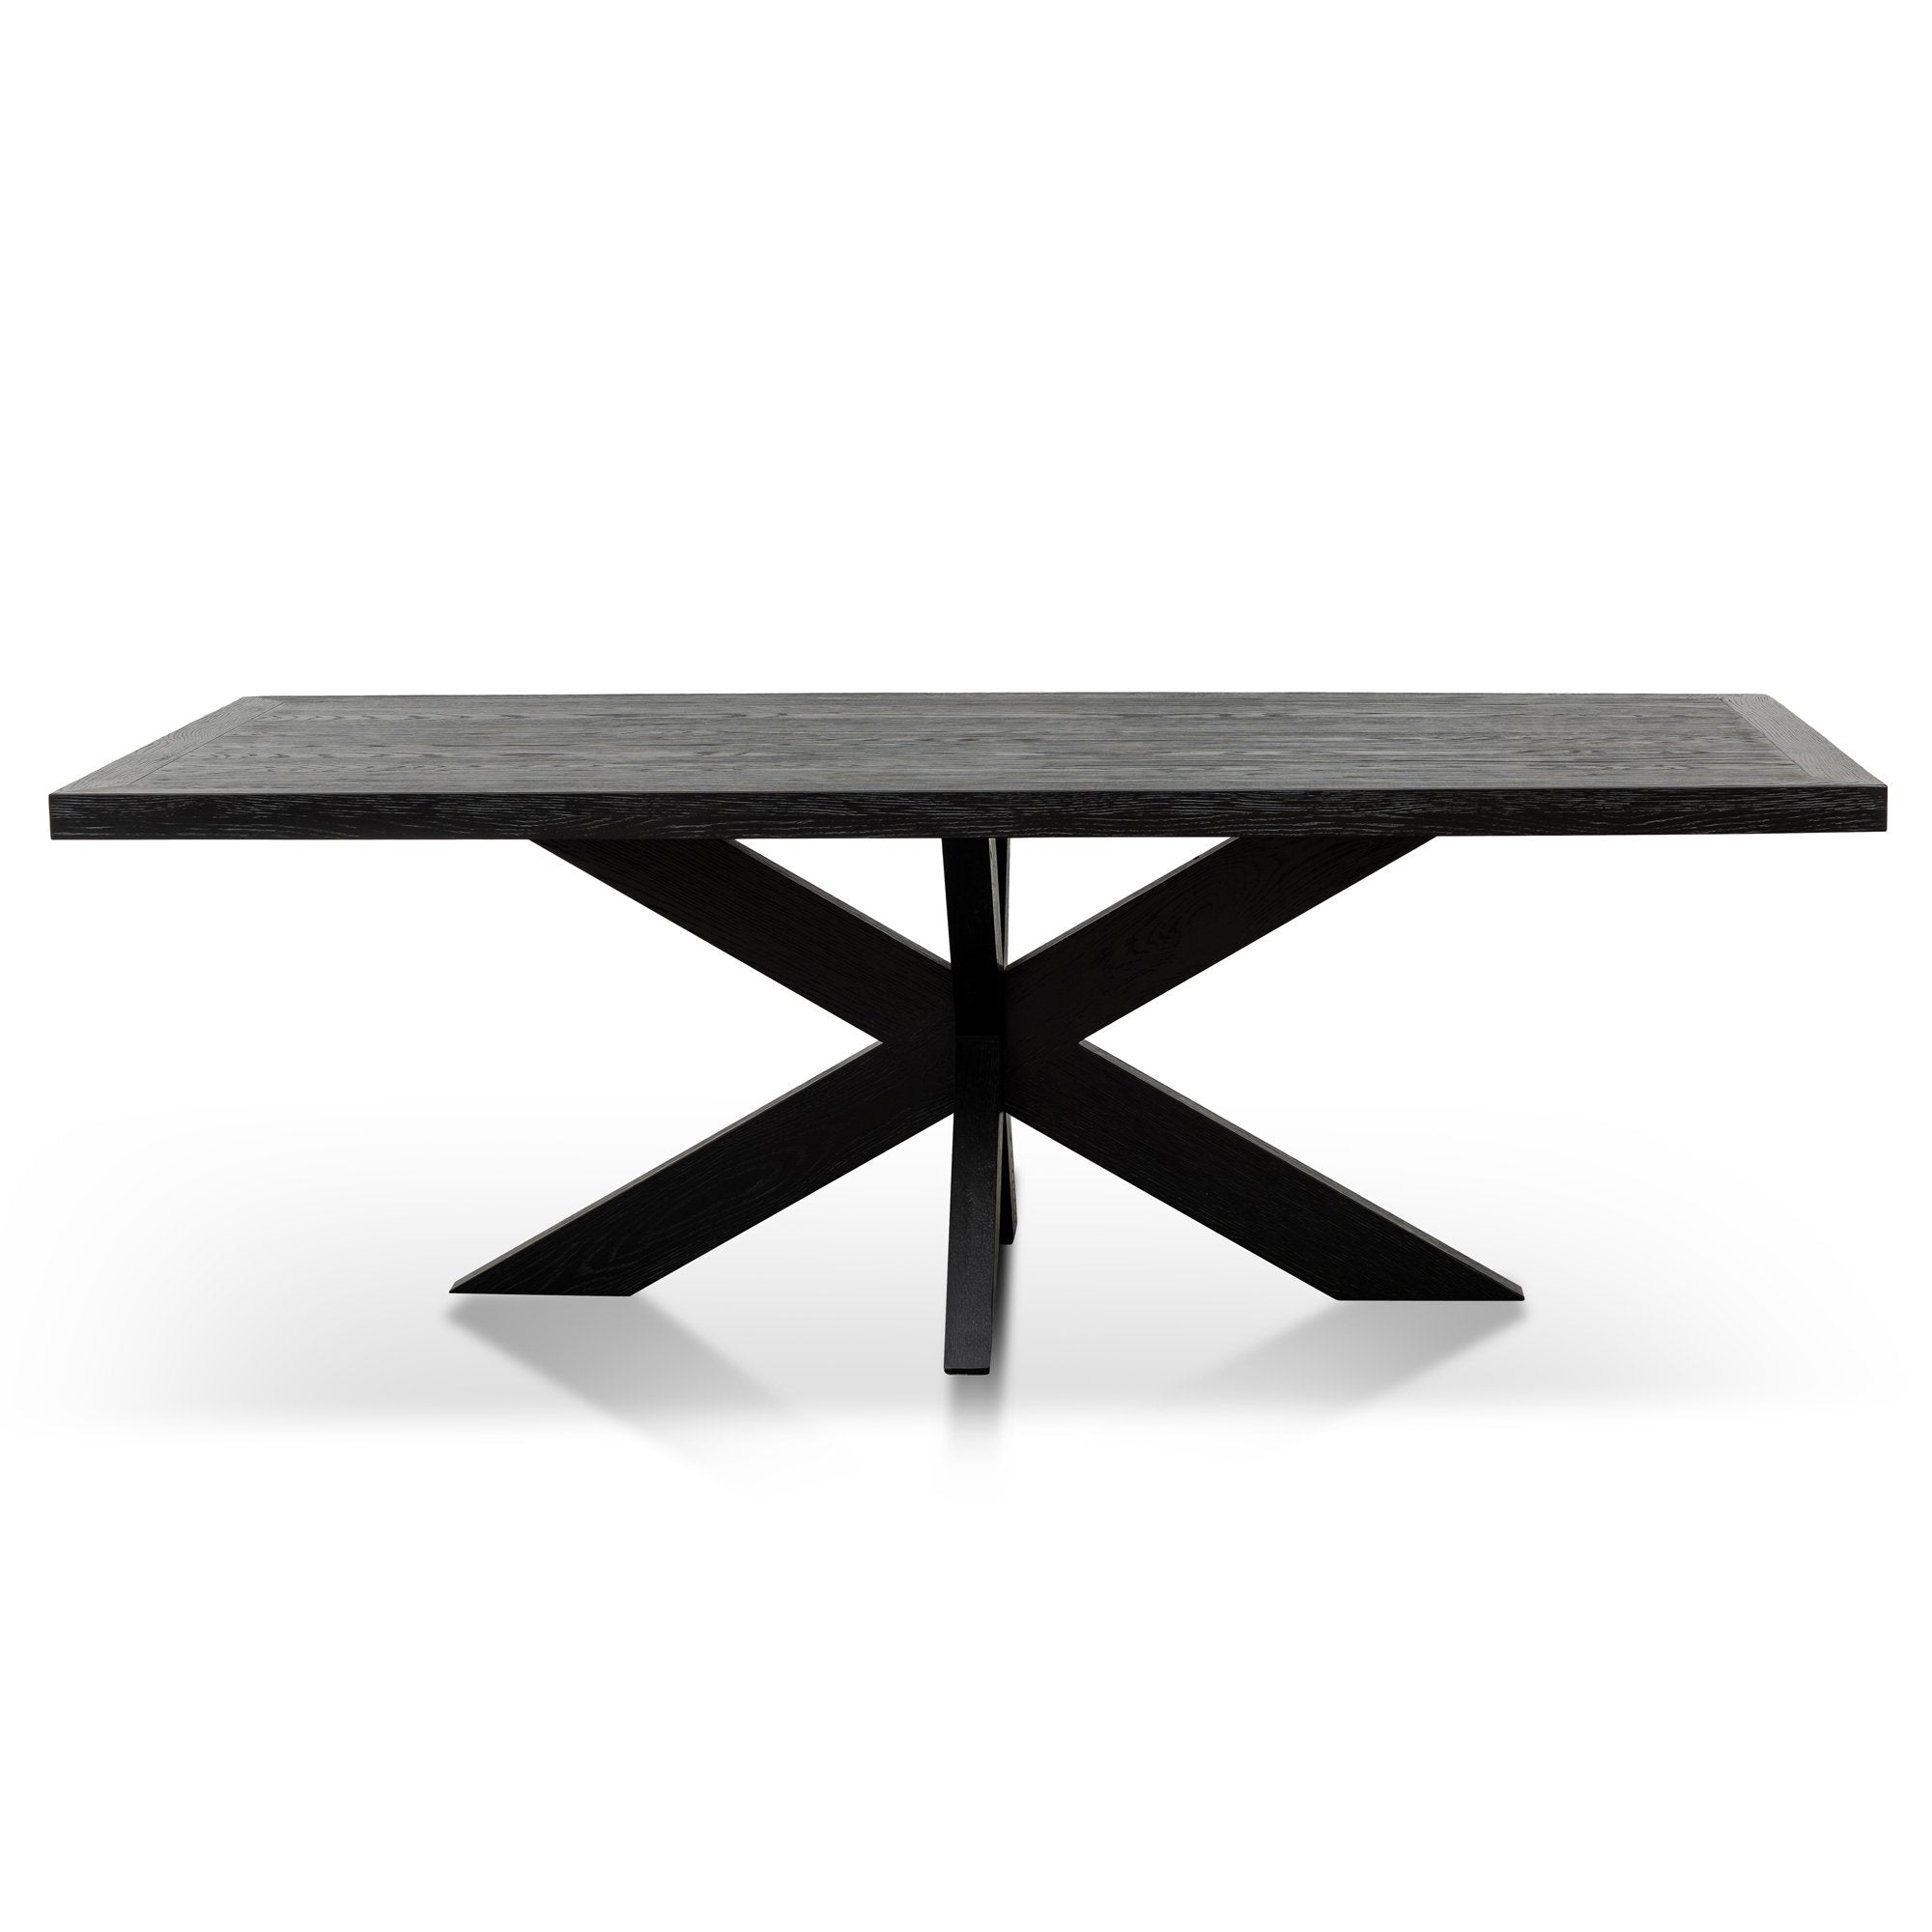 Amazon 2.2m Wooden Dining Table - Full Black - Dining Tables